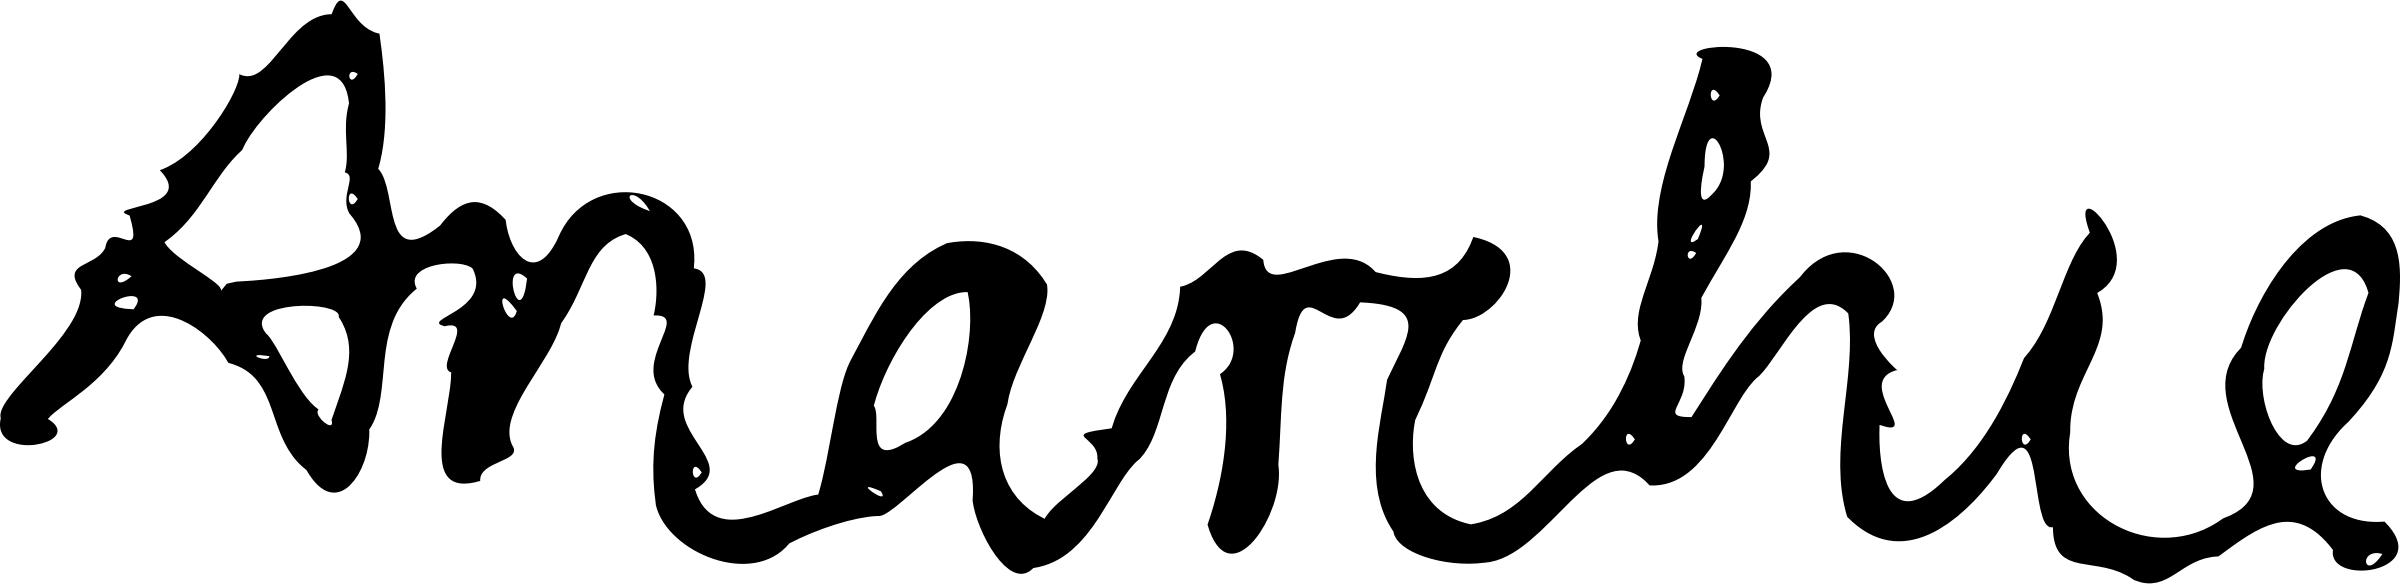 Anarchie Graffito png